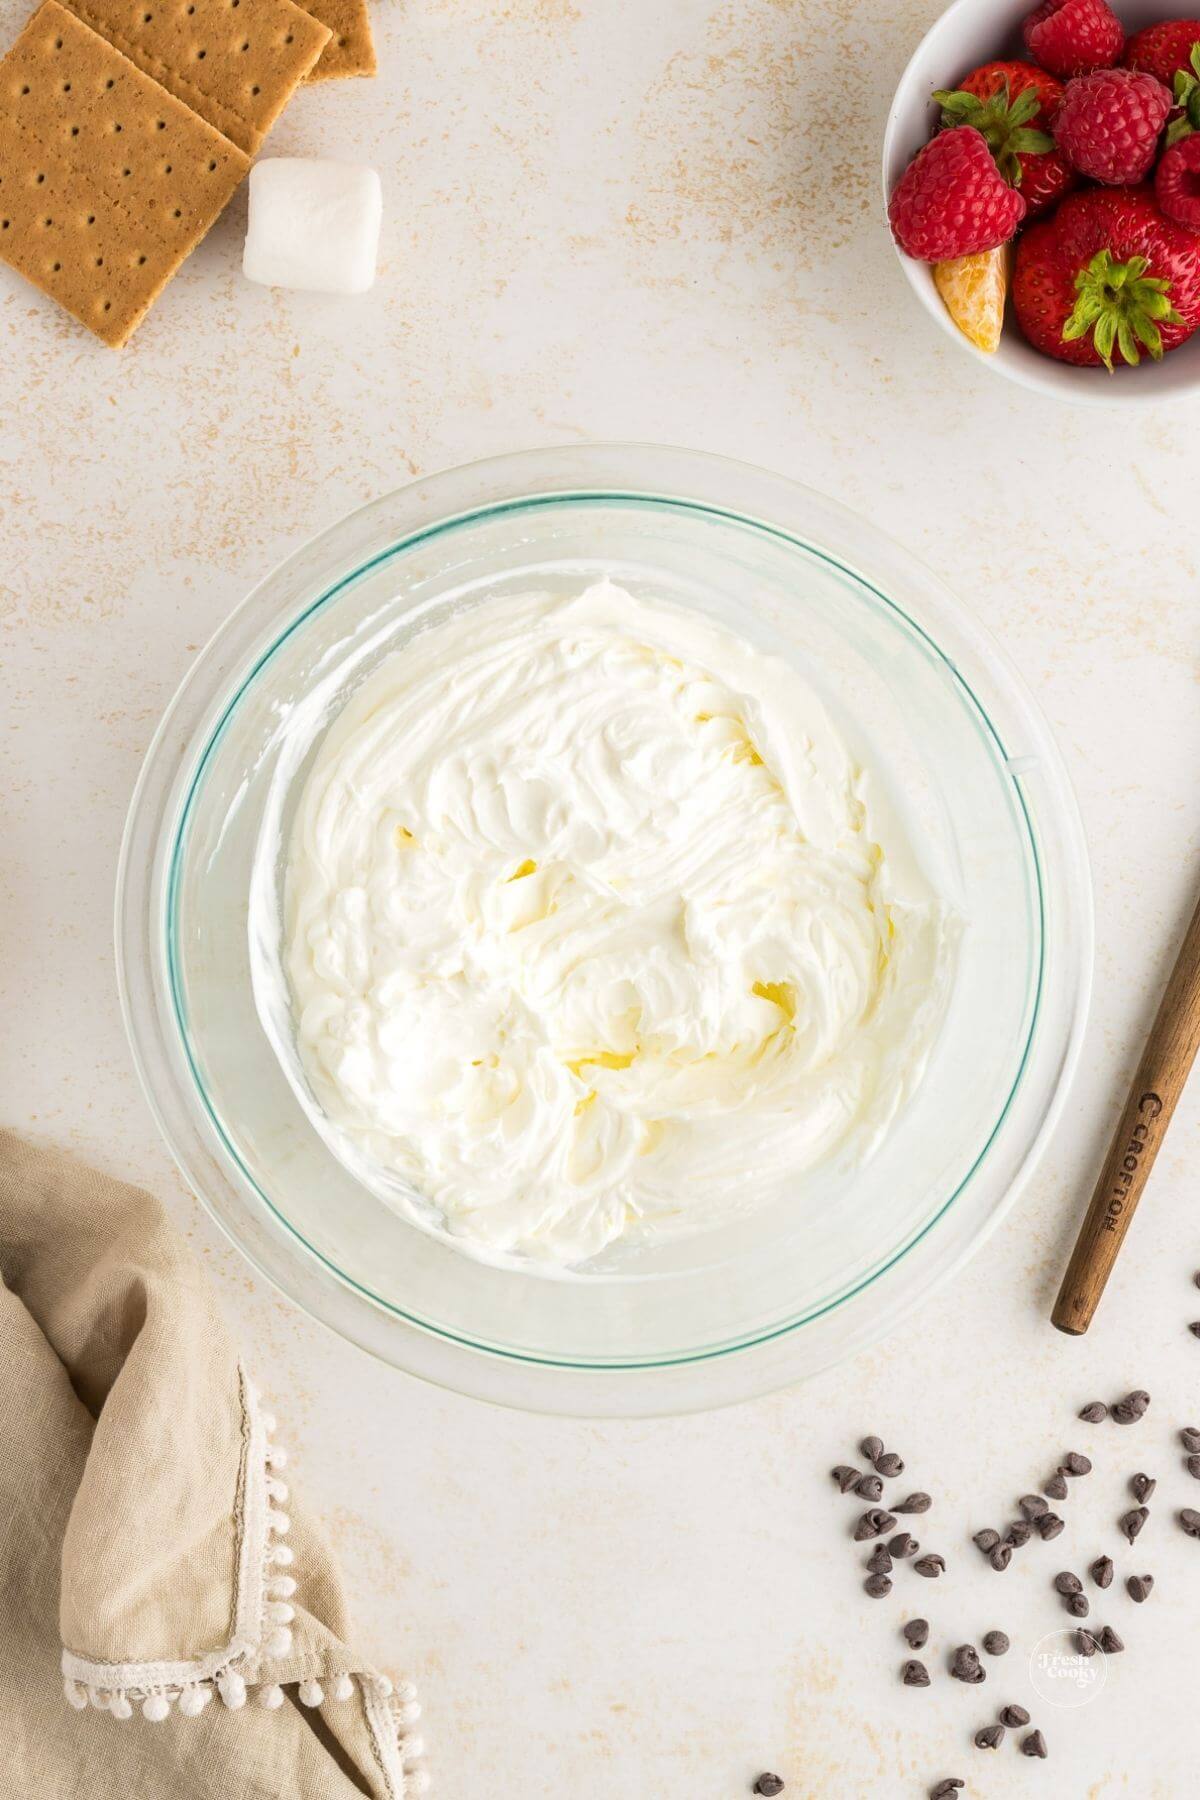 Whipped heavy cream ready to fold in. 